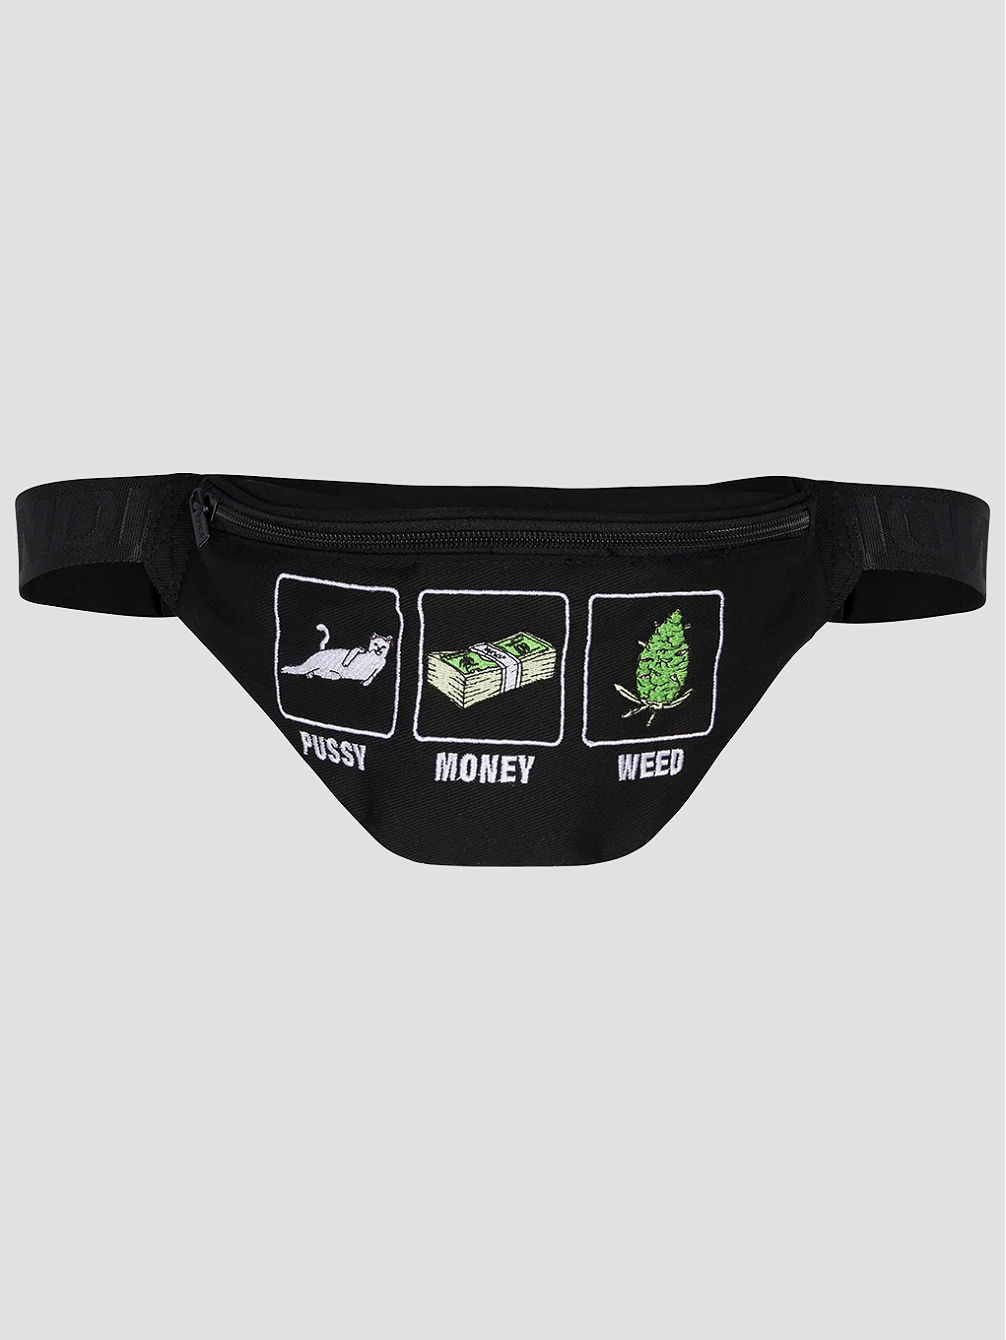 Pussy, Money, Weed Fanny Pack Borsa a Tracolla